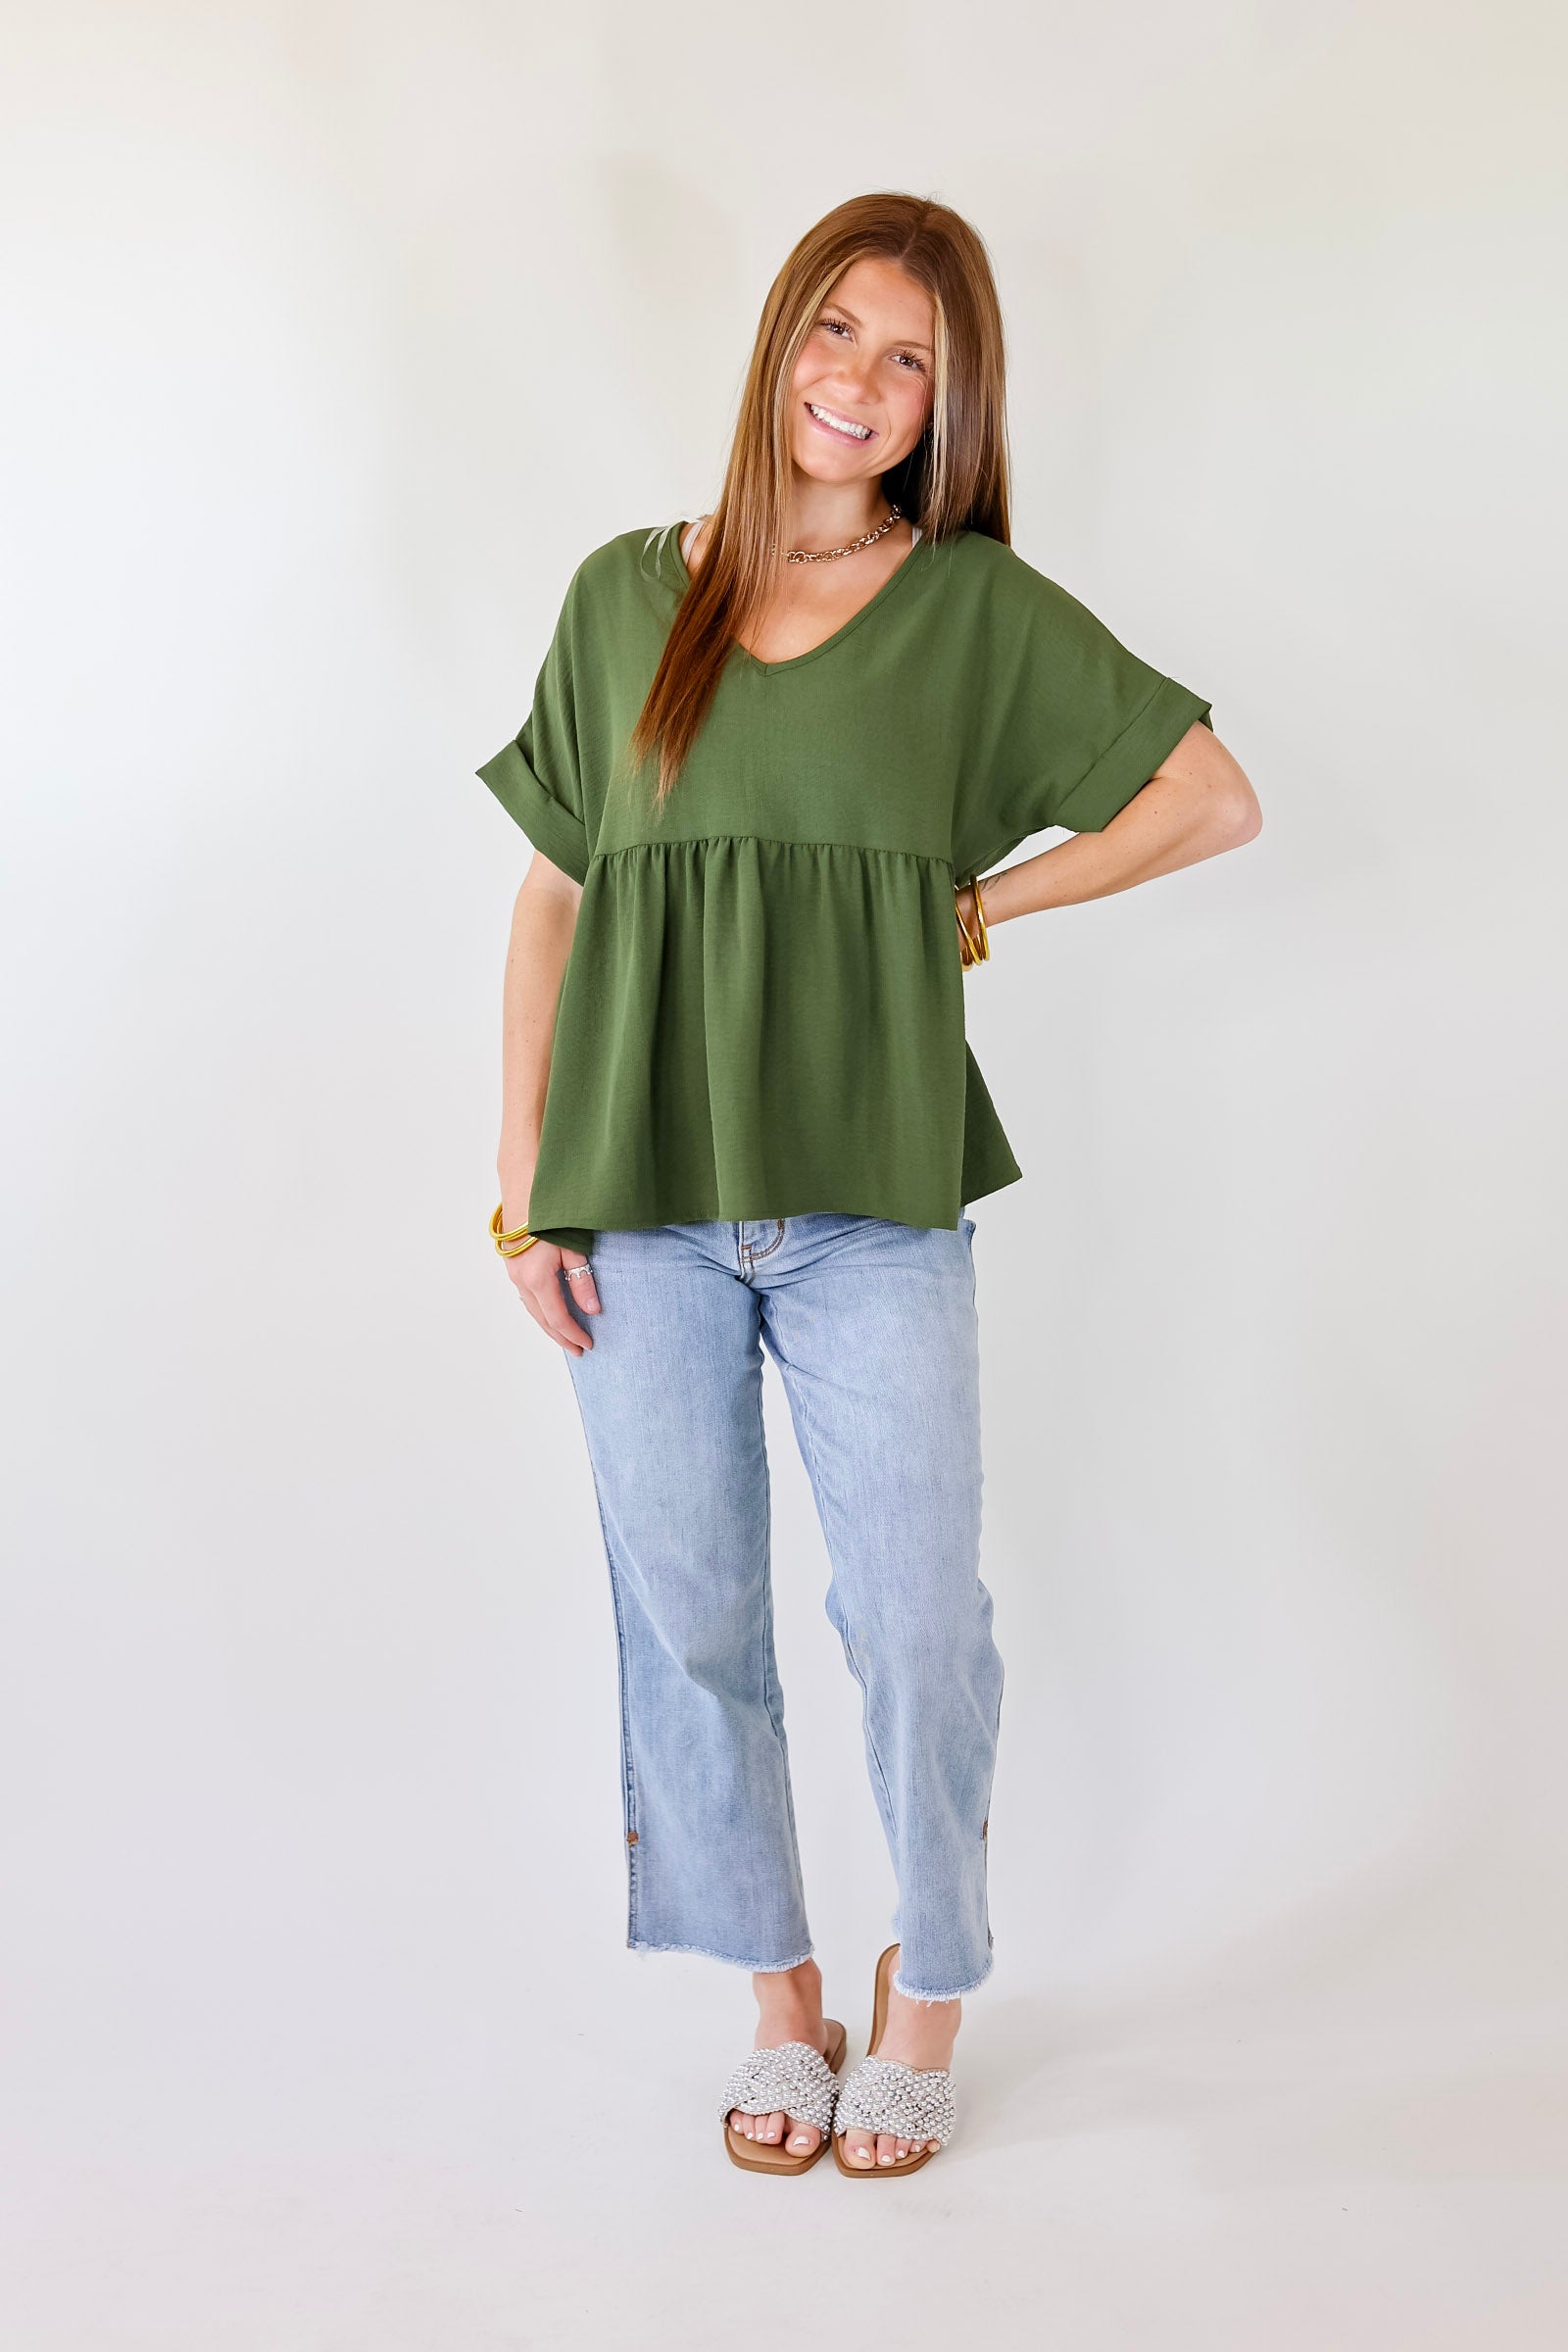 Touring the City Short Sleeve V Neck Babydoll Top in Olive Green - Giddy Up Glamour Boutique